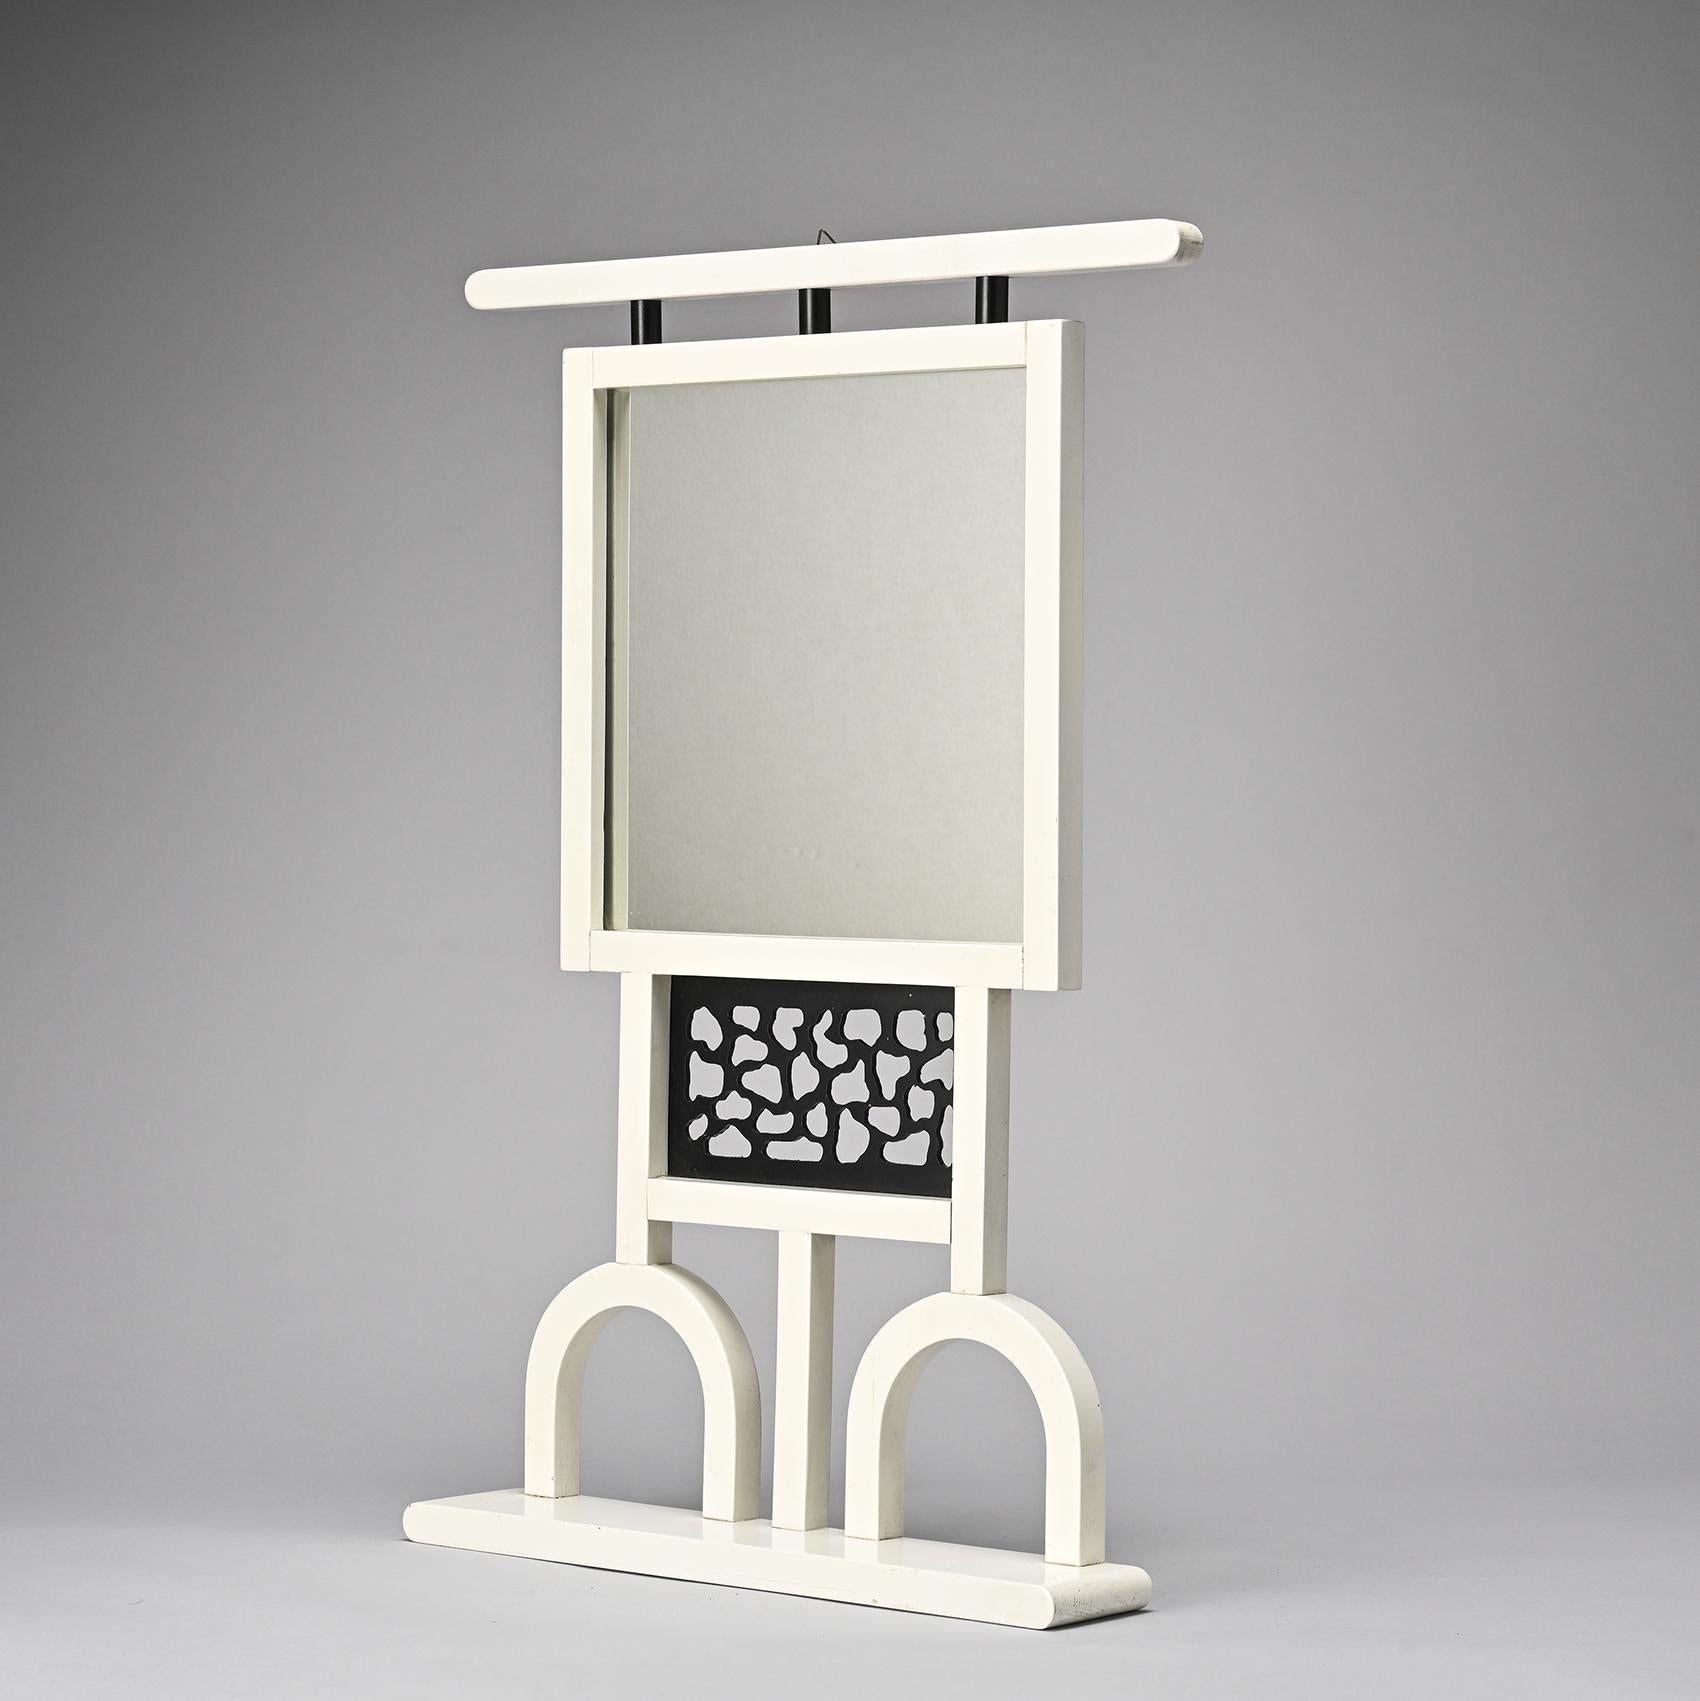 Mirror designed by George J. Sowden in the 1980s stands as a testament to his innovative approach to design. As a co-founder of the groundbreaking Memphis group alongside luminaries like Ettore Sottsass, Sowden was instrumental in spearheading an